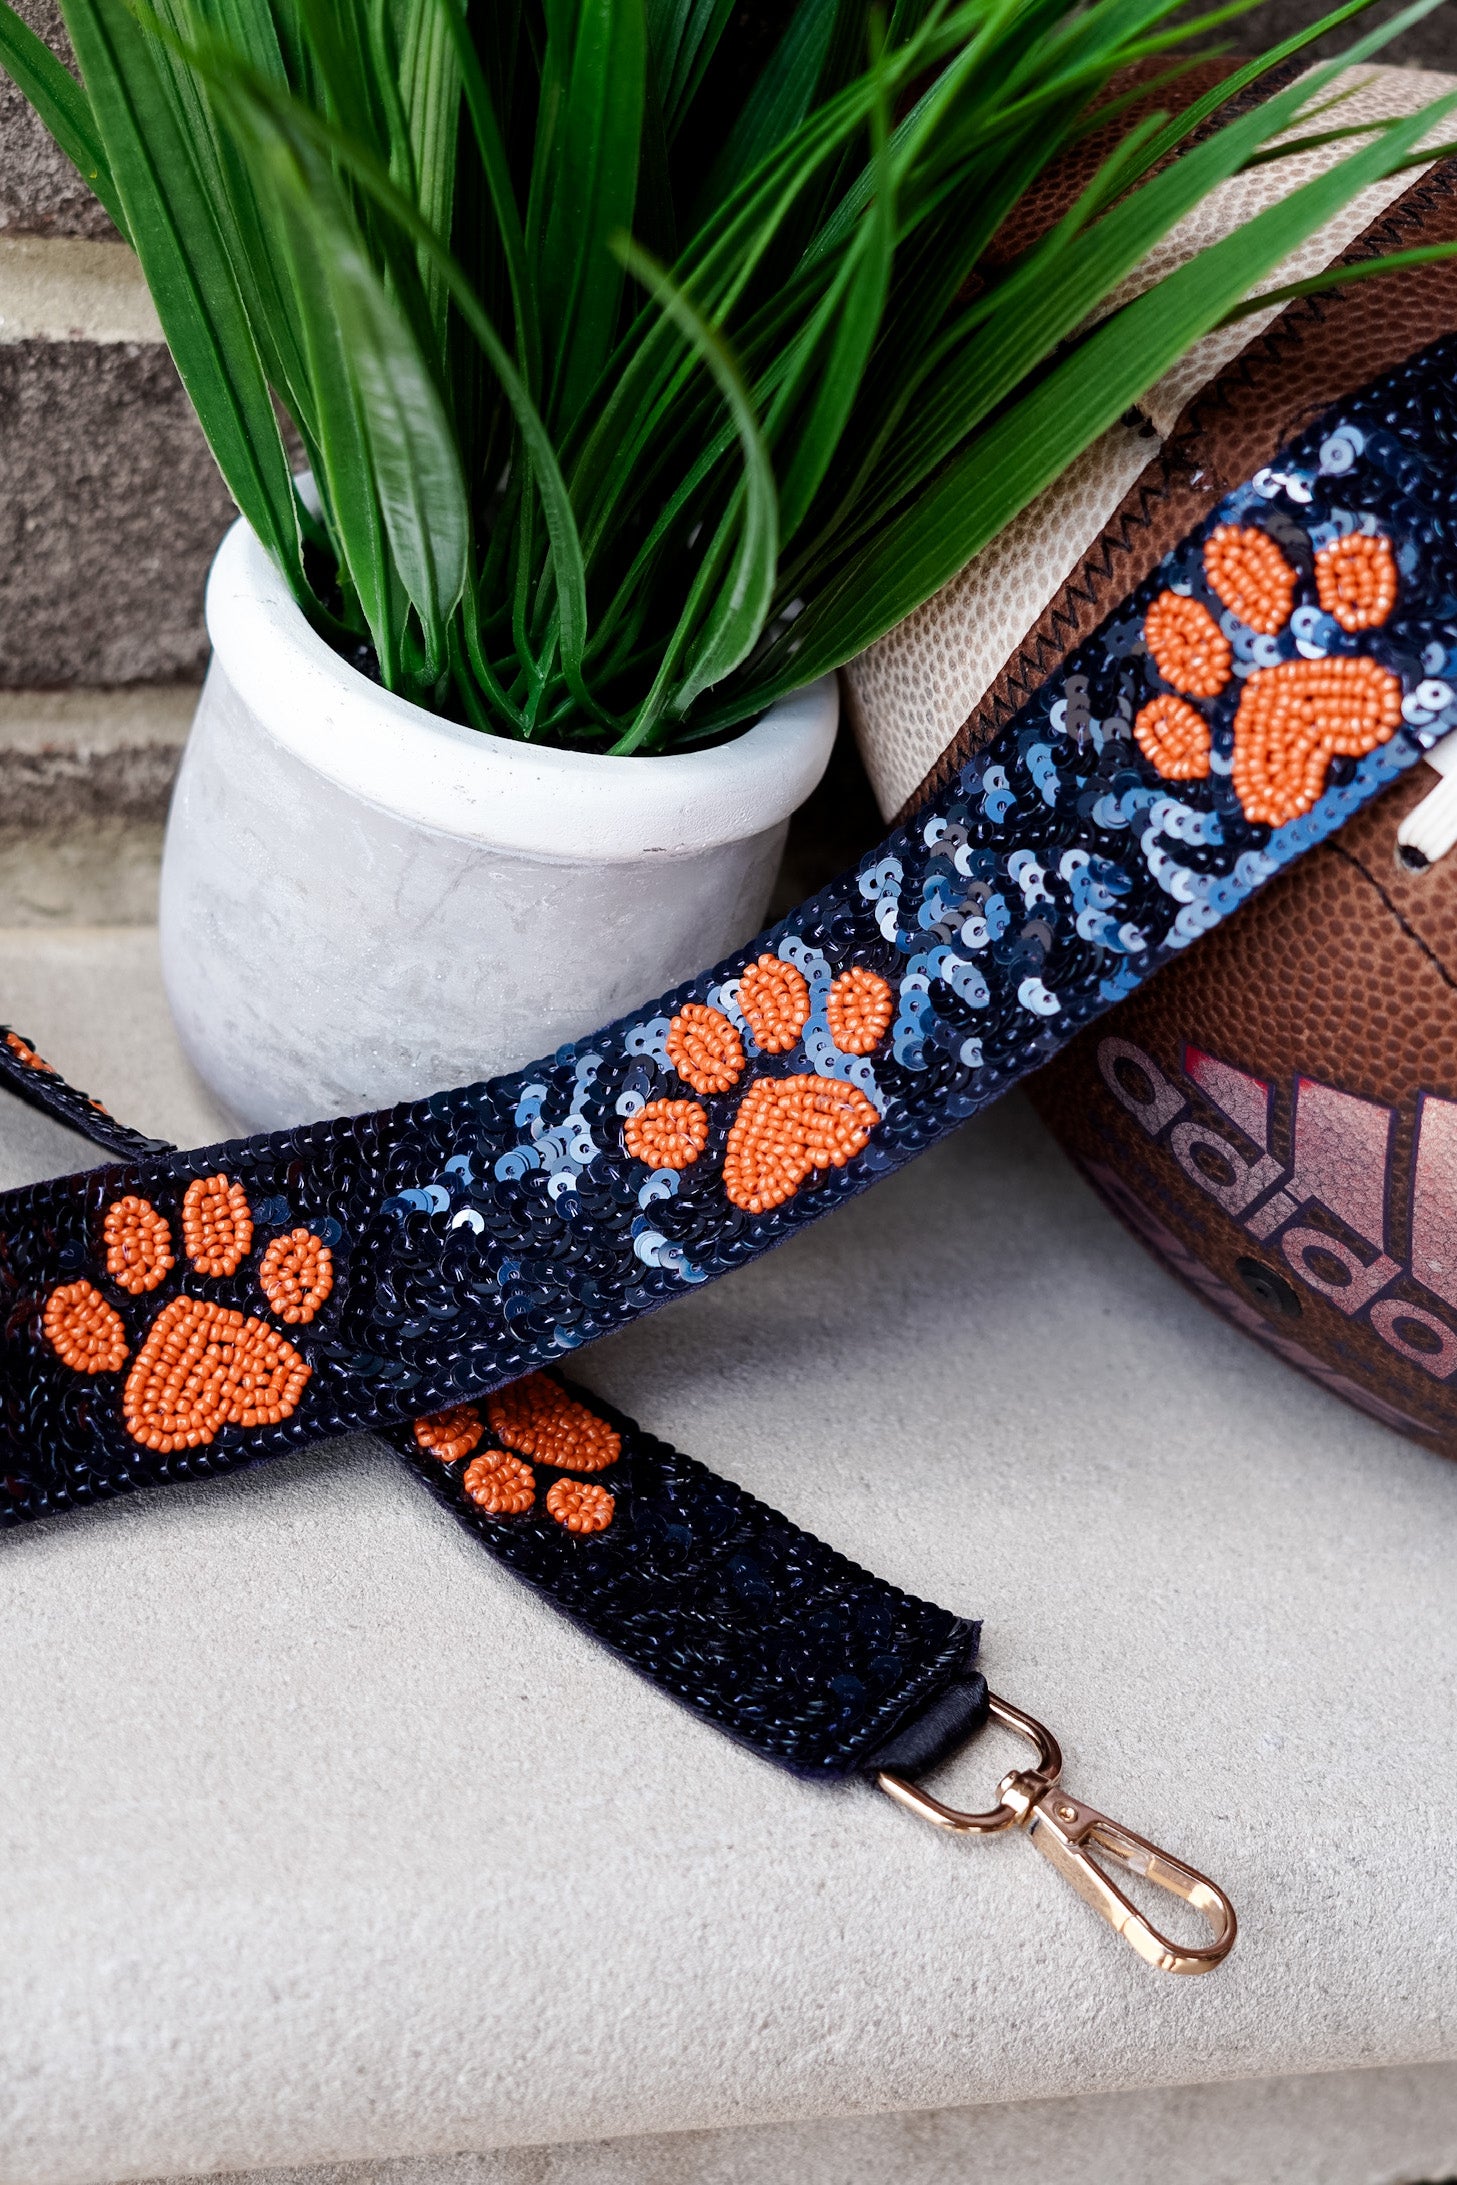 Clear bags can be such a bore when your outfit is on point for game day!! No fear, grab a Game Day Beaded Crossbody Strap whether you are Rolling with the Tide or headed to the Plains!!  Sequin Game Day Strap 46.5" including gold hooks. Navy beaded strap with orange paw prints.